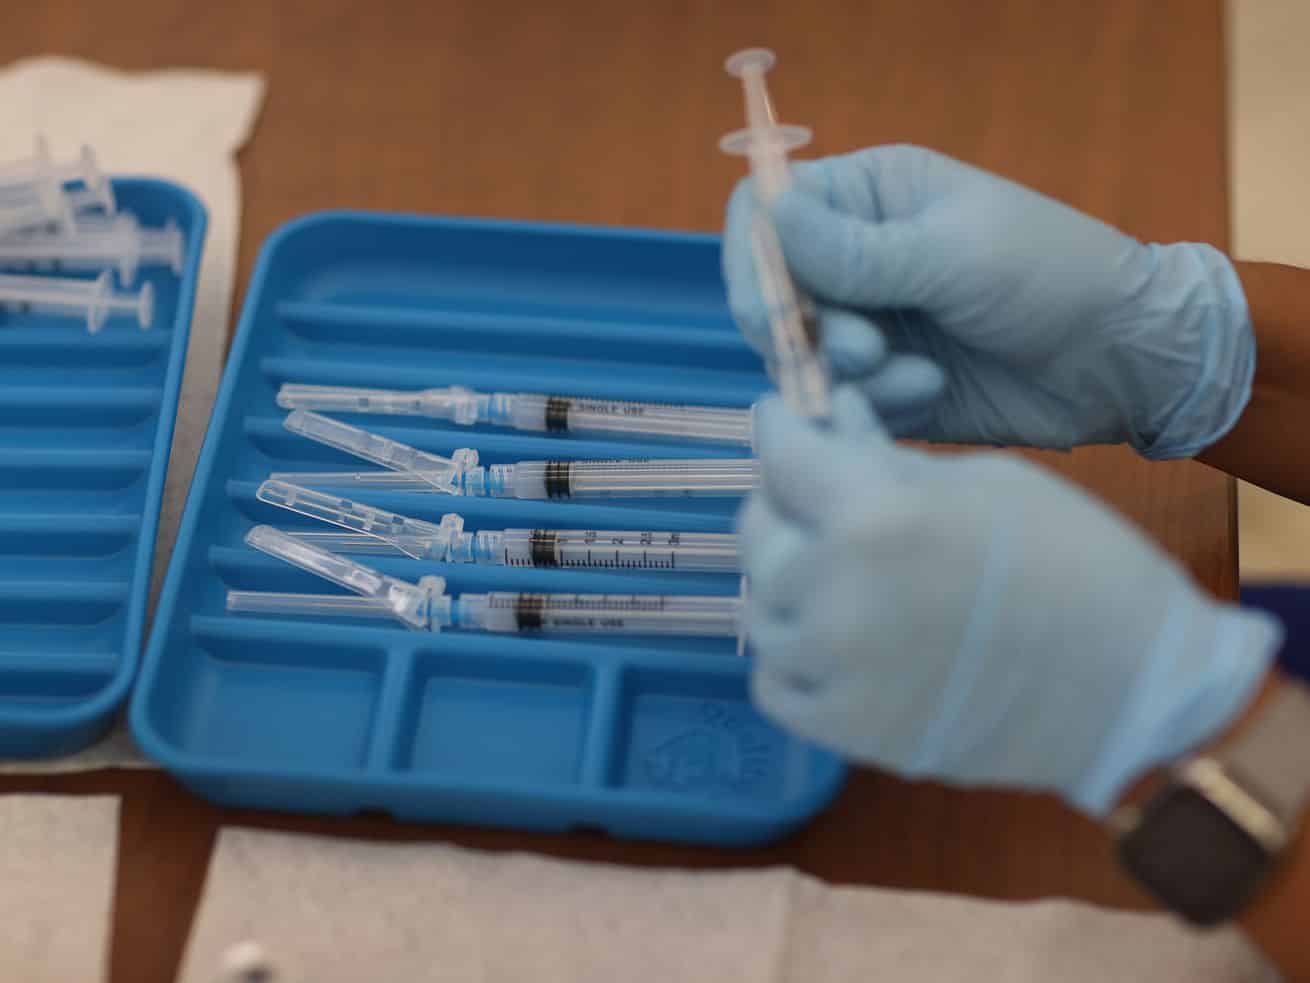 Tennessee has one of the lowest vax rates. Republicans are working to keep it that way.